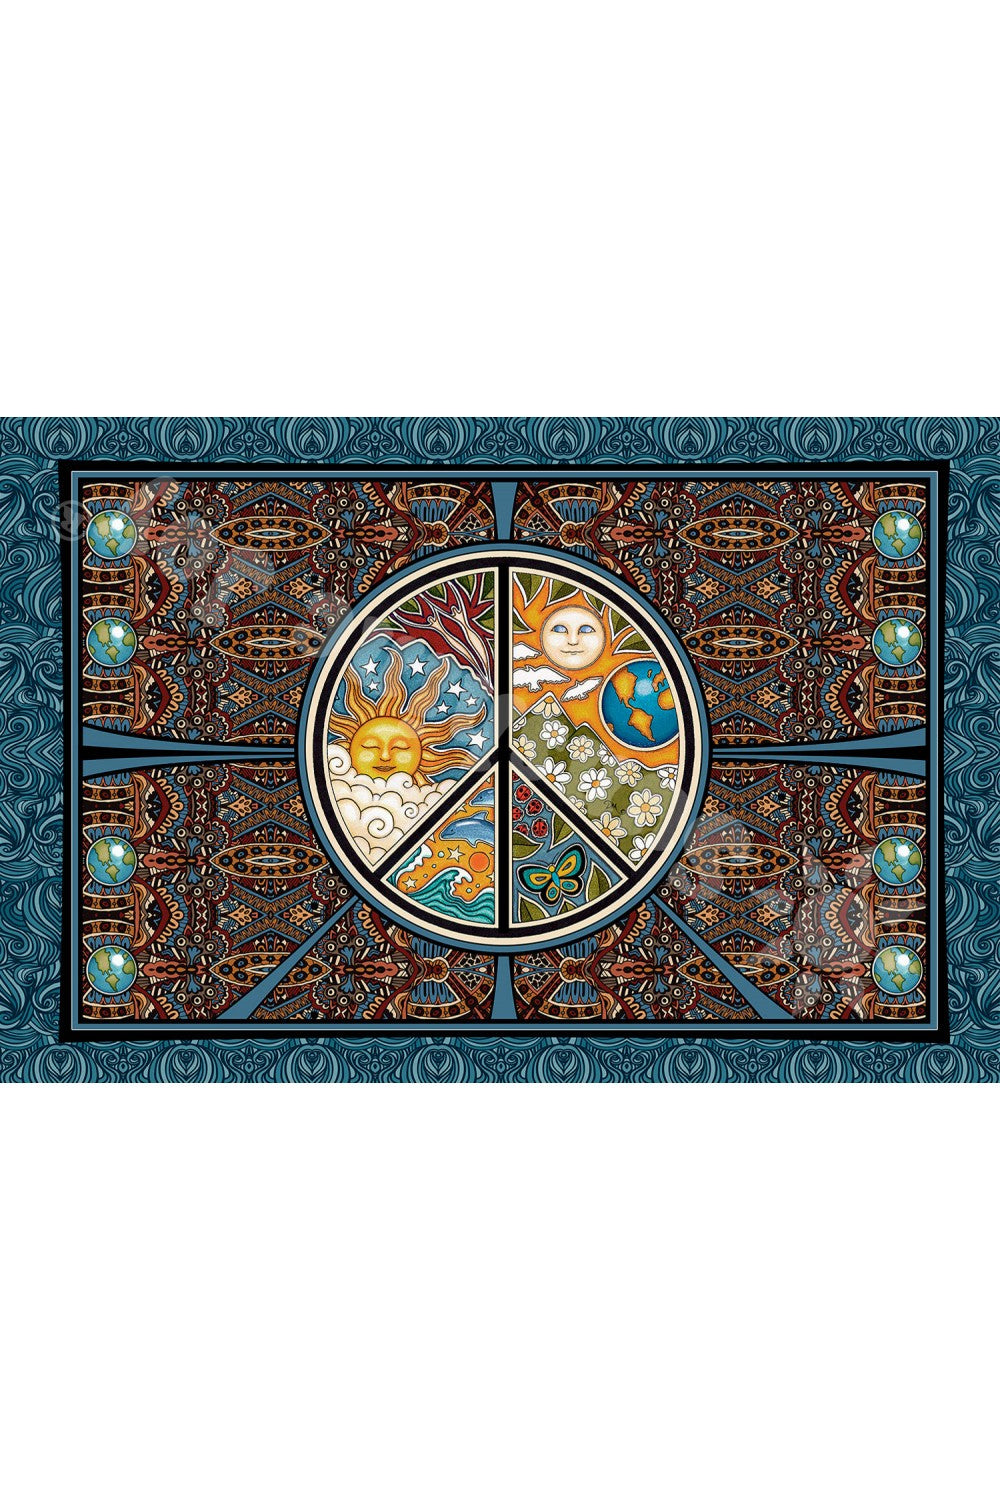 Peace Tapestry